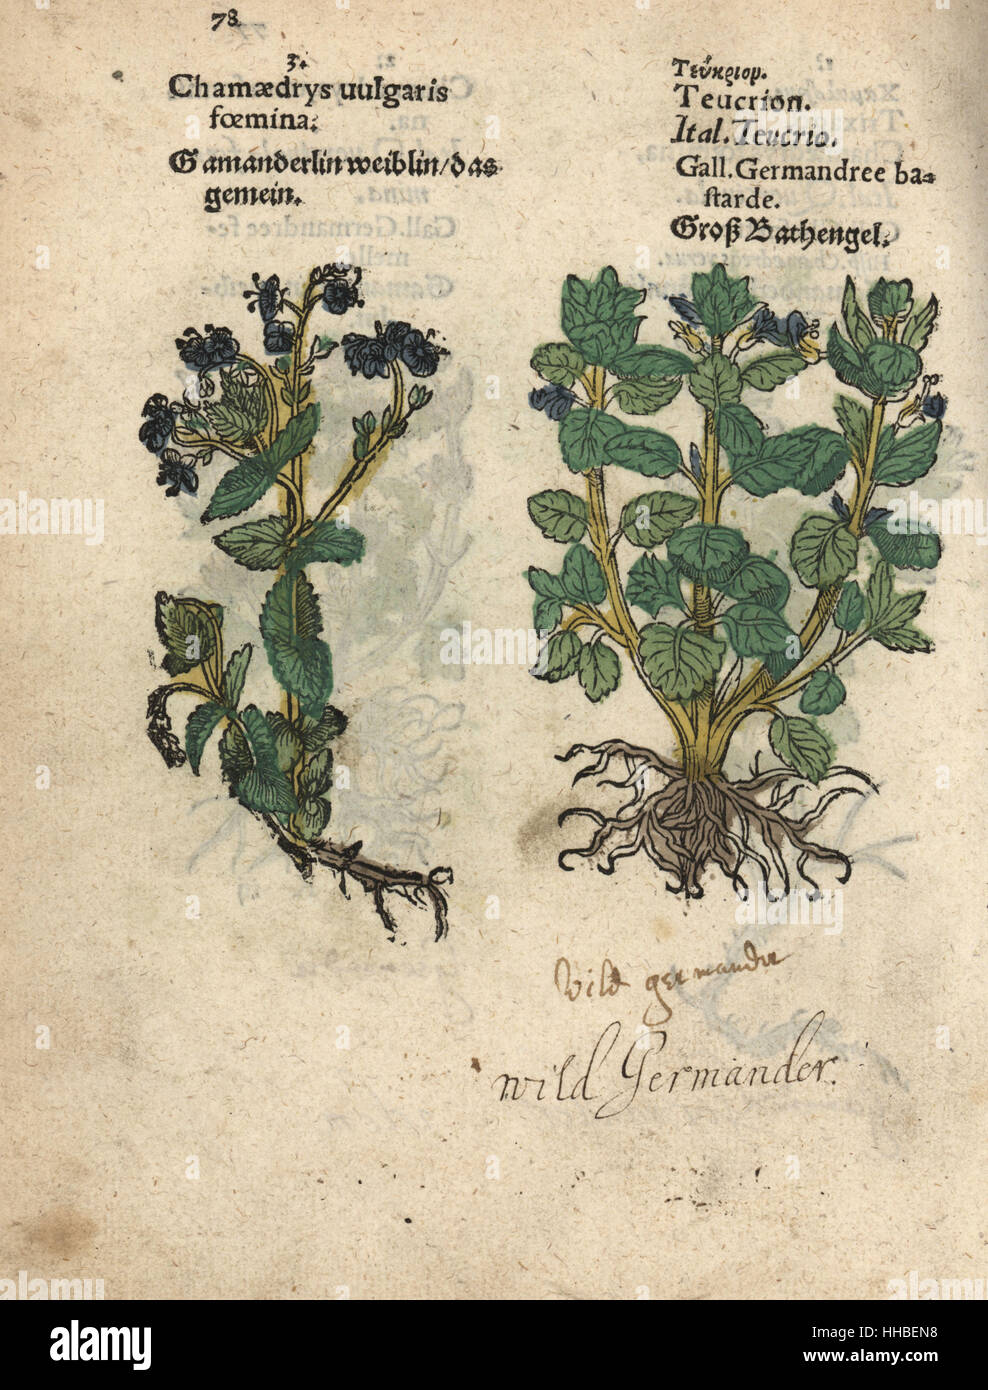 Bird's eye, Veronica chamaedrys, and yellow germander, Teucrium flavum. Handcoloured woodblock engraving of a botanical illustration from Adam Lonicer's Krauterbuch, or Herbal, Frankfurt, 1557. This from a 17th century pirate edition or atlas of illustrations only, with captions in Latin, Greek, French, Italian, German, and in English manuscript. Stock Photo